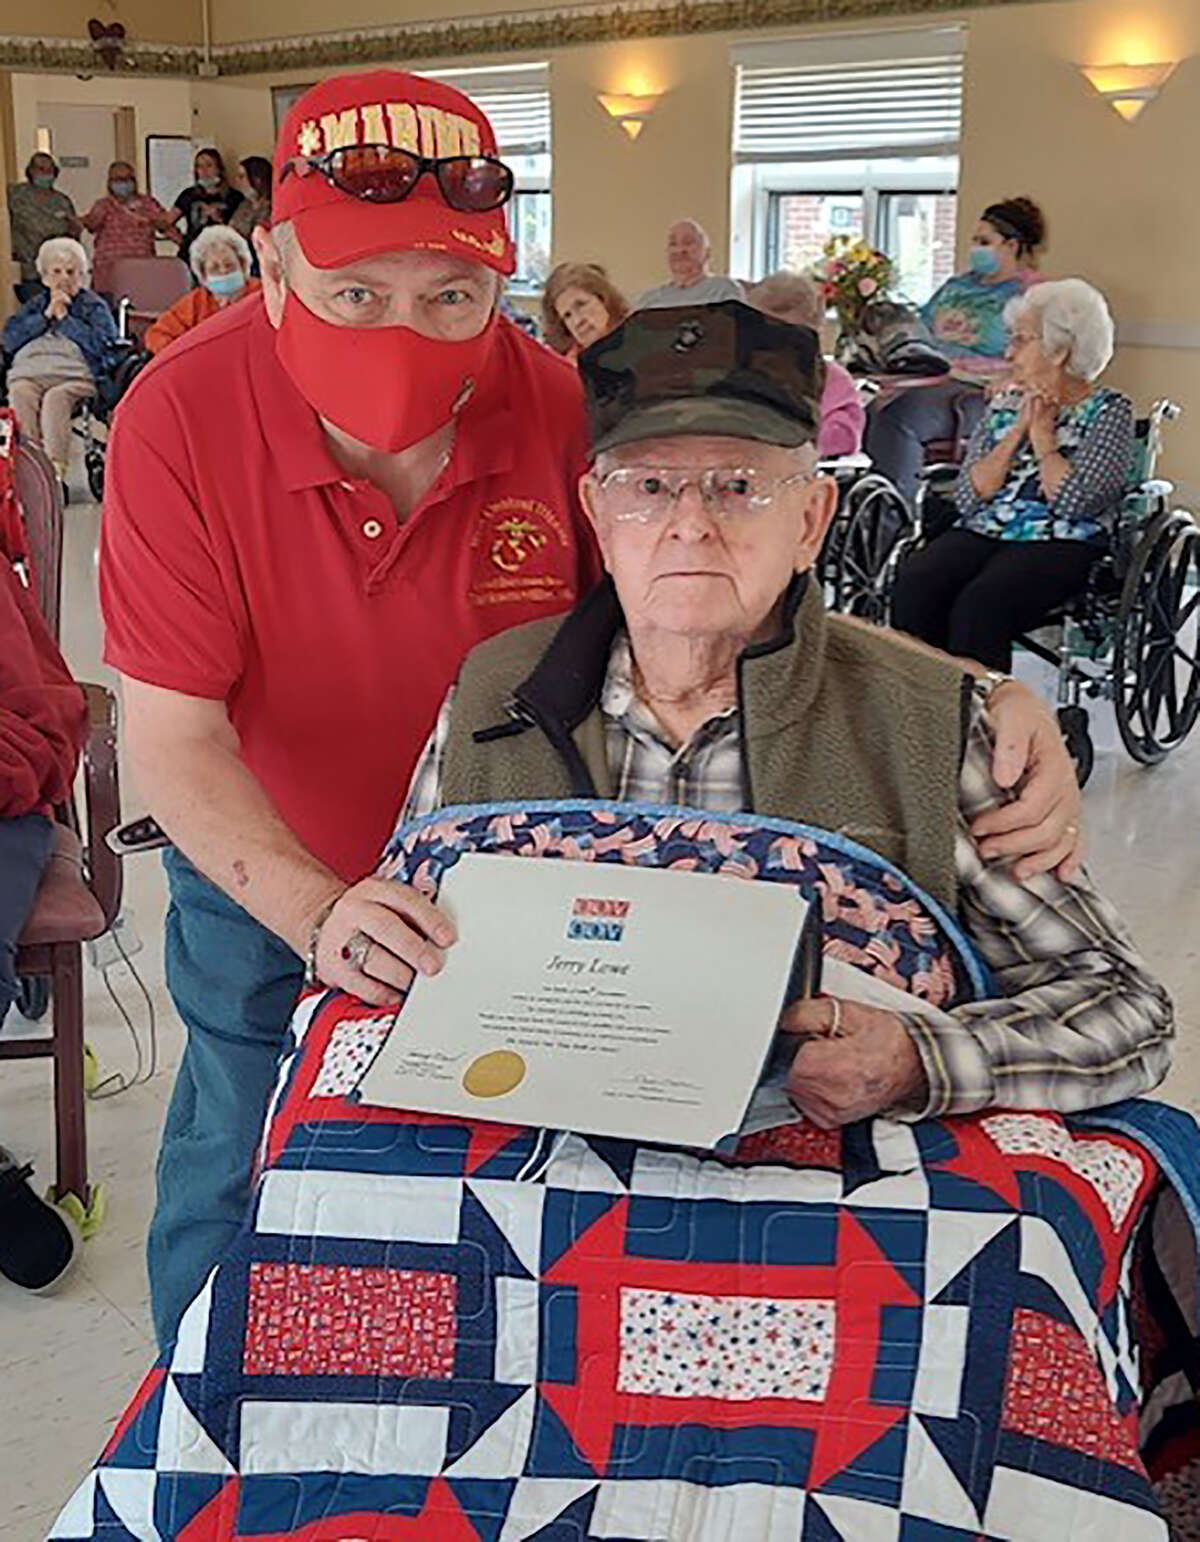 Jerry Lowe receives a Quilt of Valor from Rick Howland of West Central Illinois Marines Corps League No. 1177. Lowe is a World War II veteran and survivor of the Battle of Iwo Jima. Handmade Quilts of Valor are awarded as a source of comfort and healing to American military service members and veterans who have been touched by war. According to the Quilts of Valor Foundation, more than 302,712 quilts have been presented since the effort began in 2003.